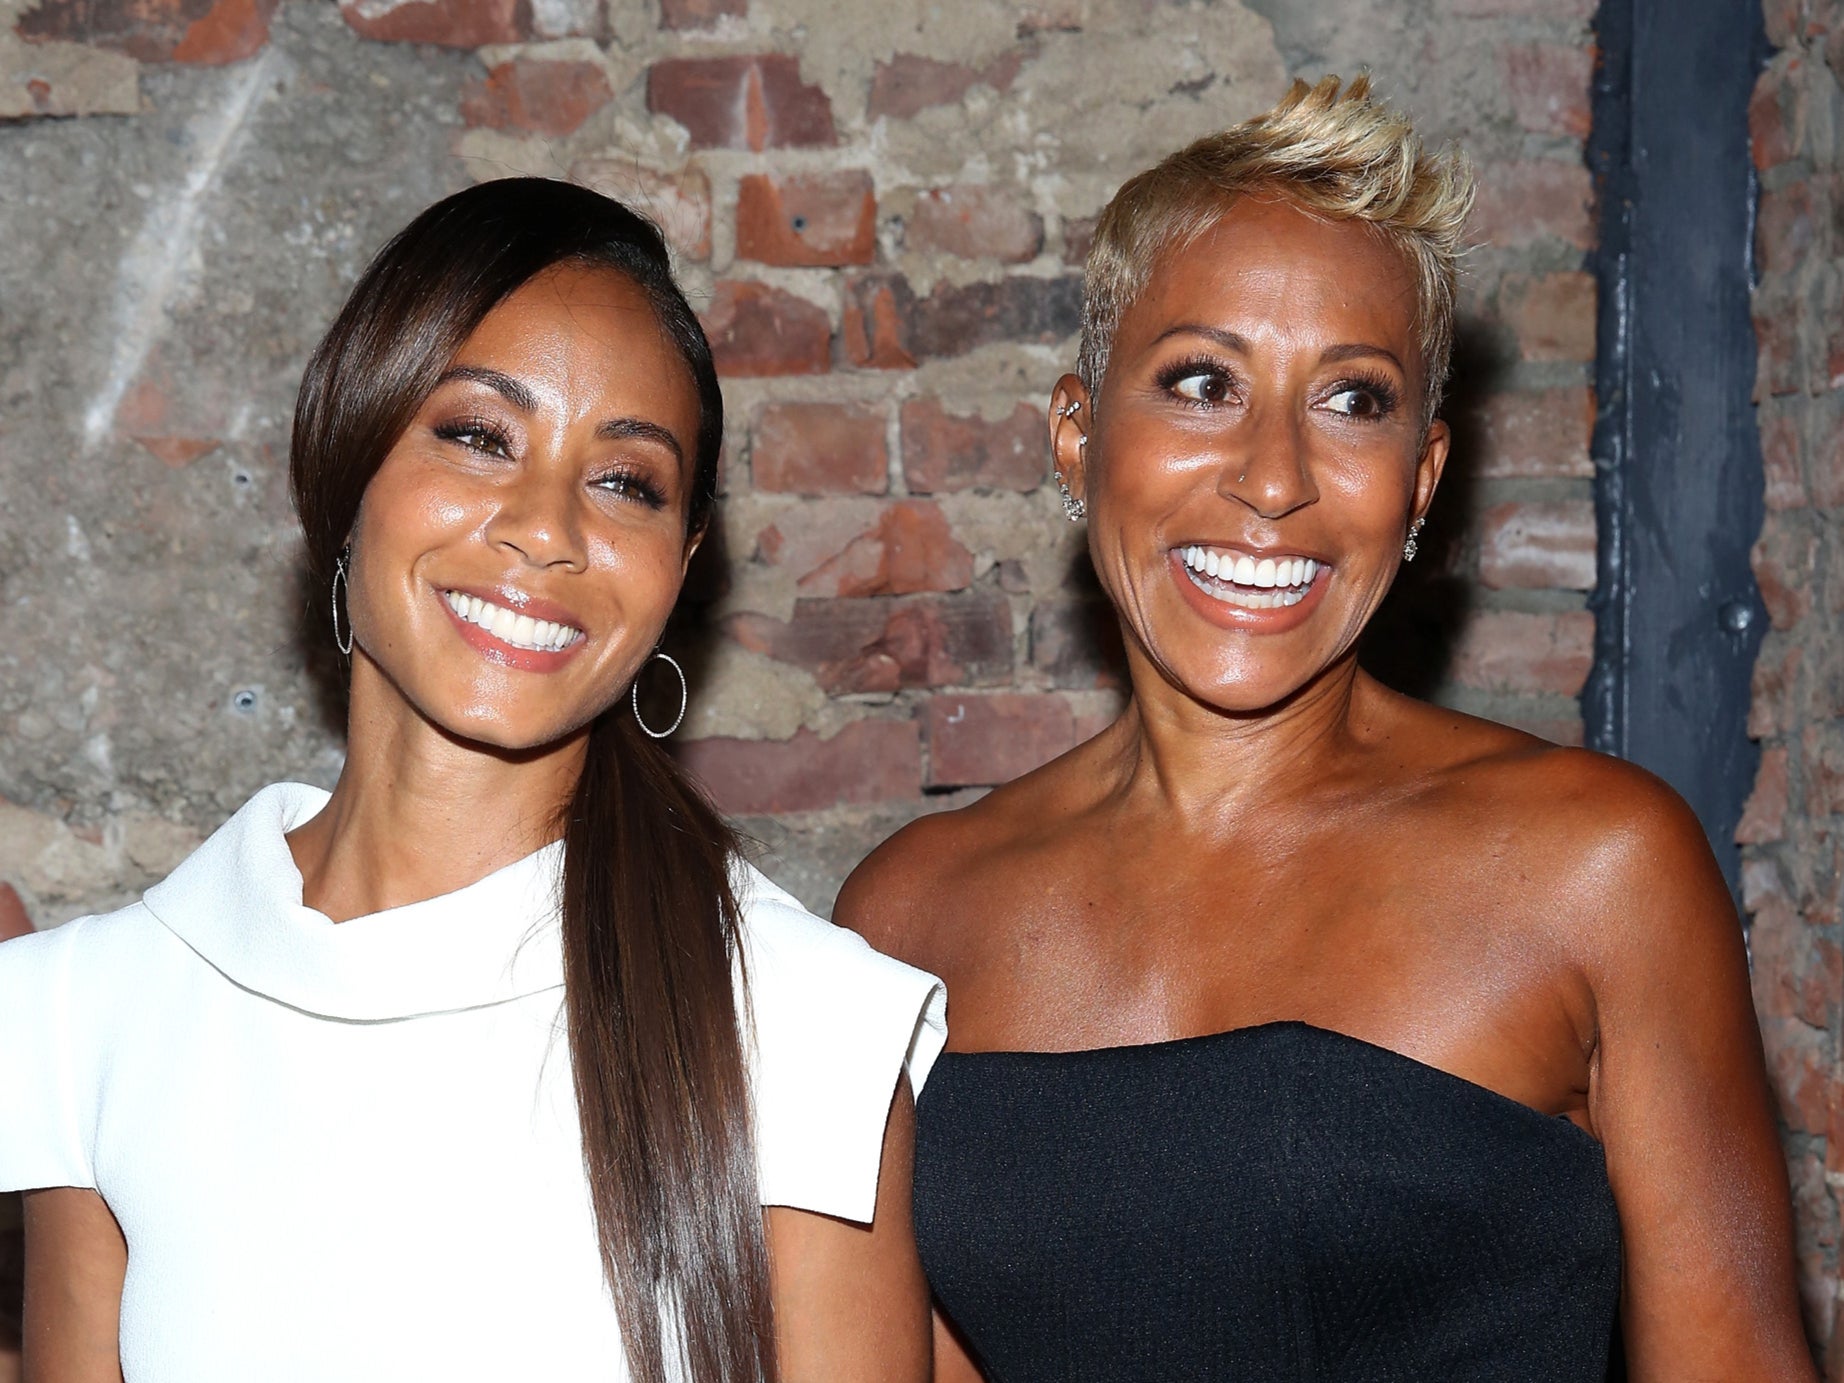 Jada Pinkett Smith’s Mother Claims She Had ‘non Consensual Sex’ With